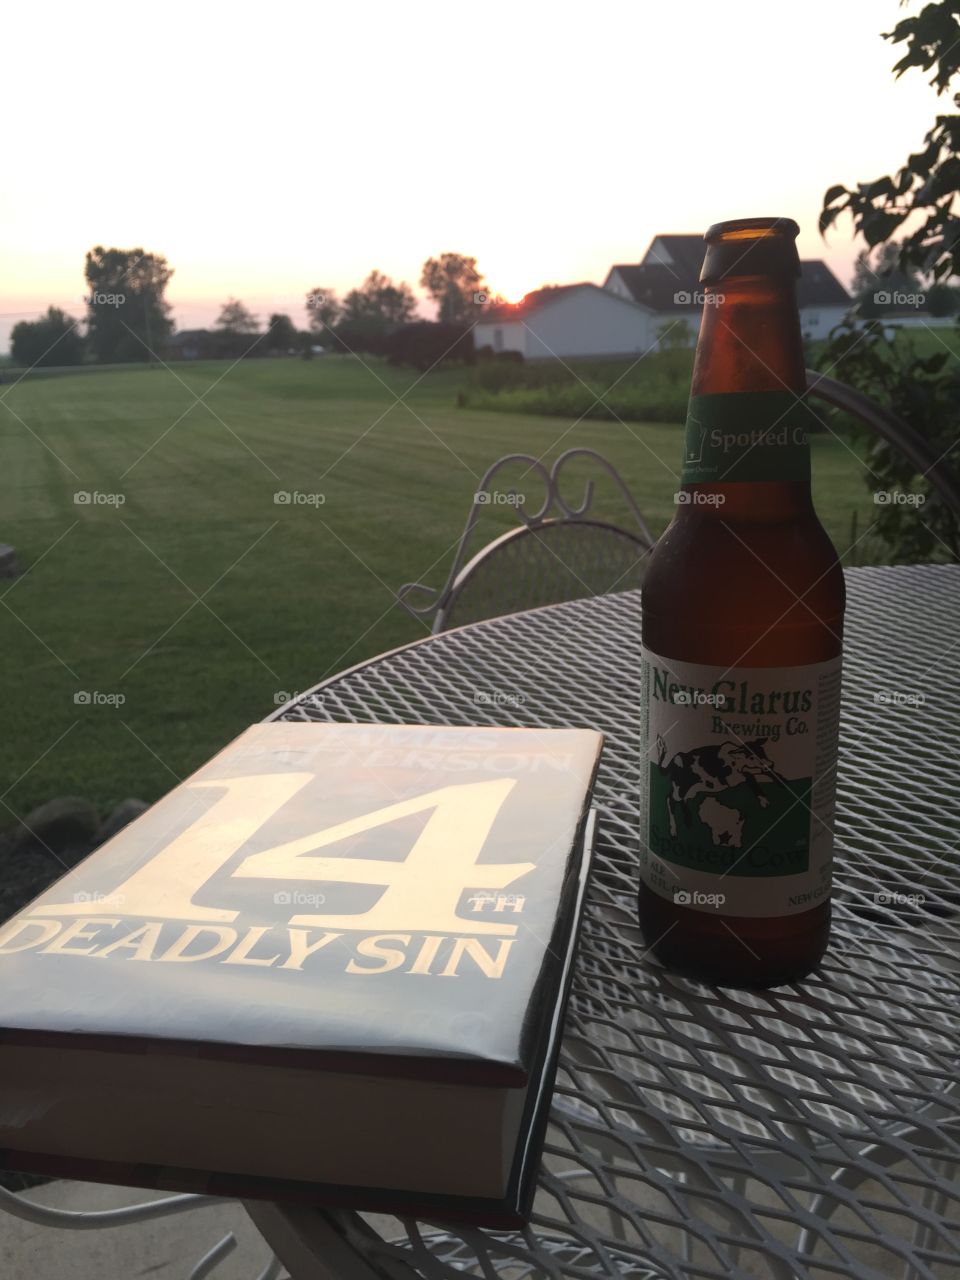 Good book, good brew, great view